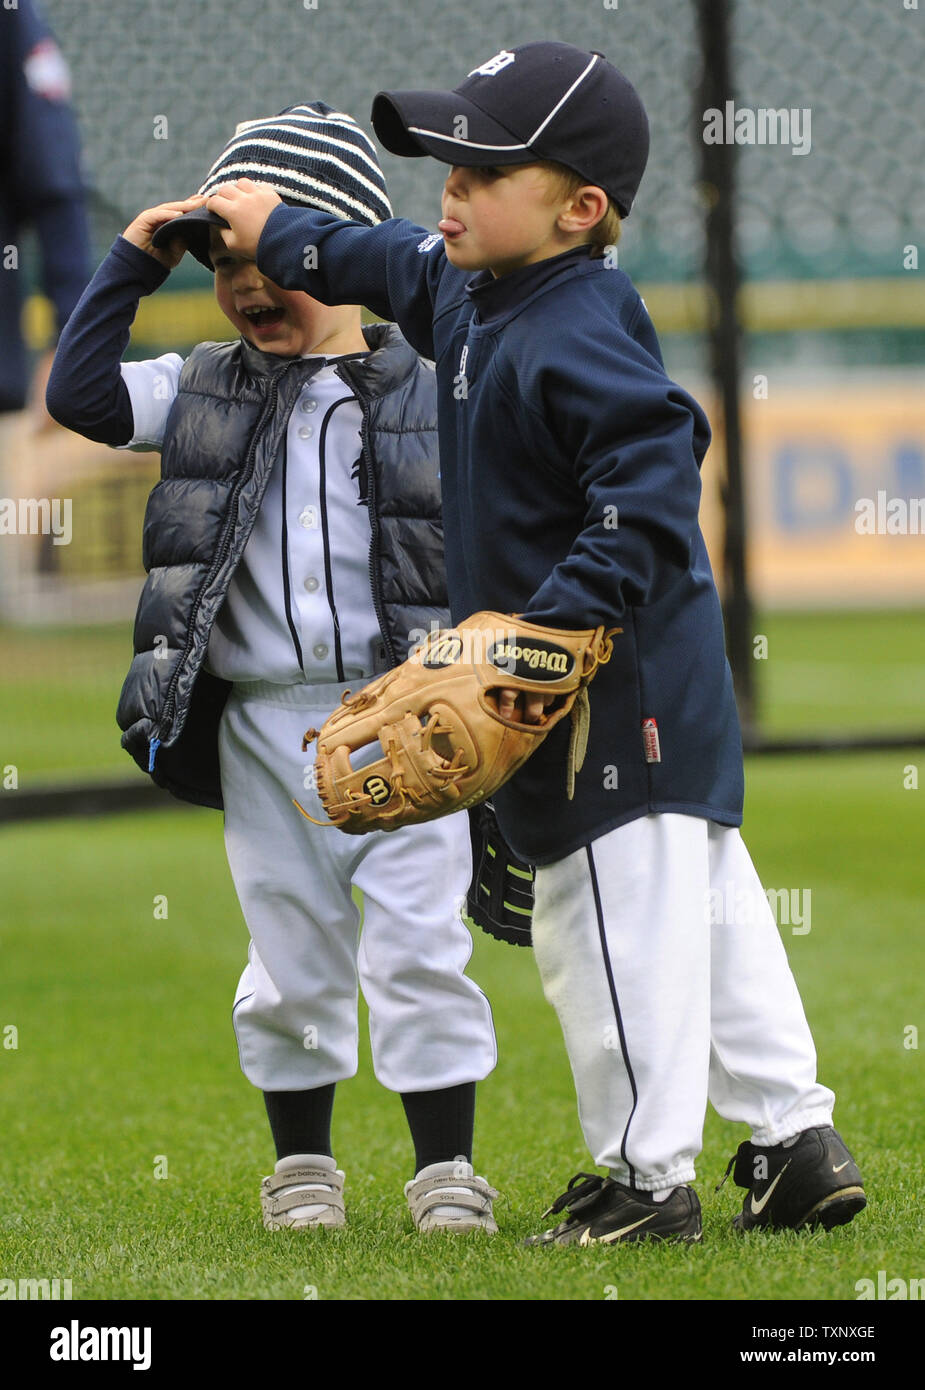 Bret Kelly (L), the son of Detroit Tigers out fielder Don Kelly, and Gage Brookens, the grandson of Tigers first base coach Tom Brookens, play on the field during Tigers' batting practice a day before game 3 of the World Series against the San Francisco Giants 8-3 at Comerica Park in Detroit on October 26, 2012. The Giants lead the series 2-0.  UPI/Kevin Dietsch Stock Photo